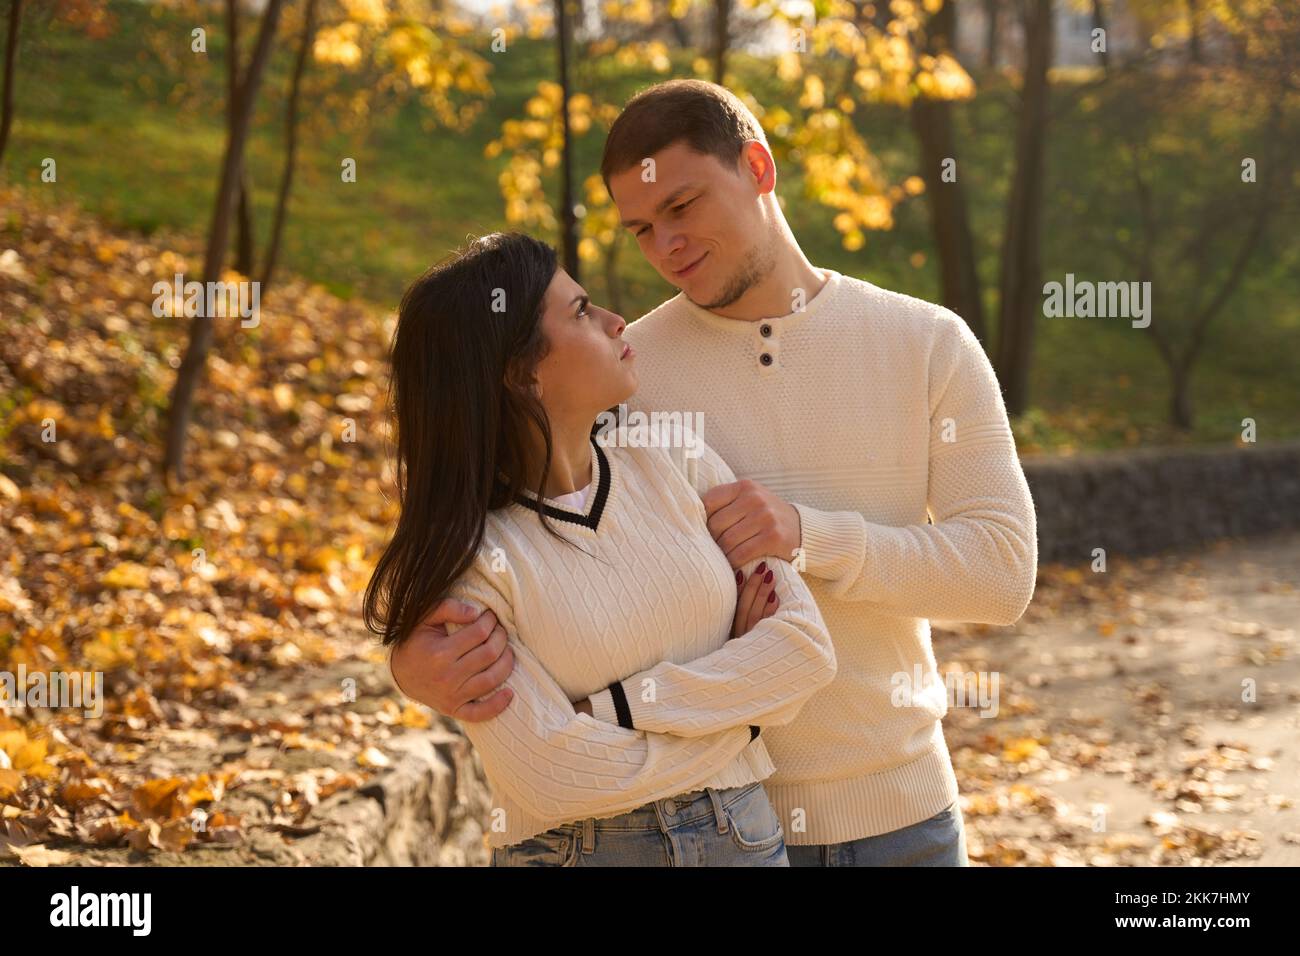 Smiling guy with a slight unshaven gently hugged his girlfriend Stock Photo